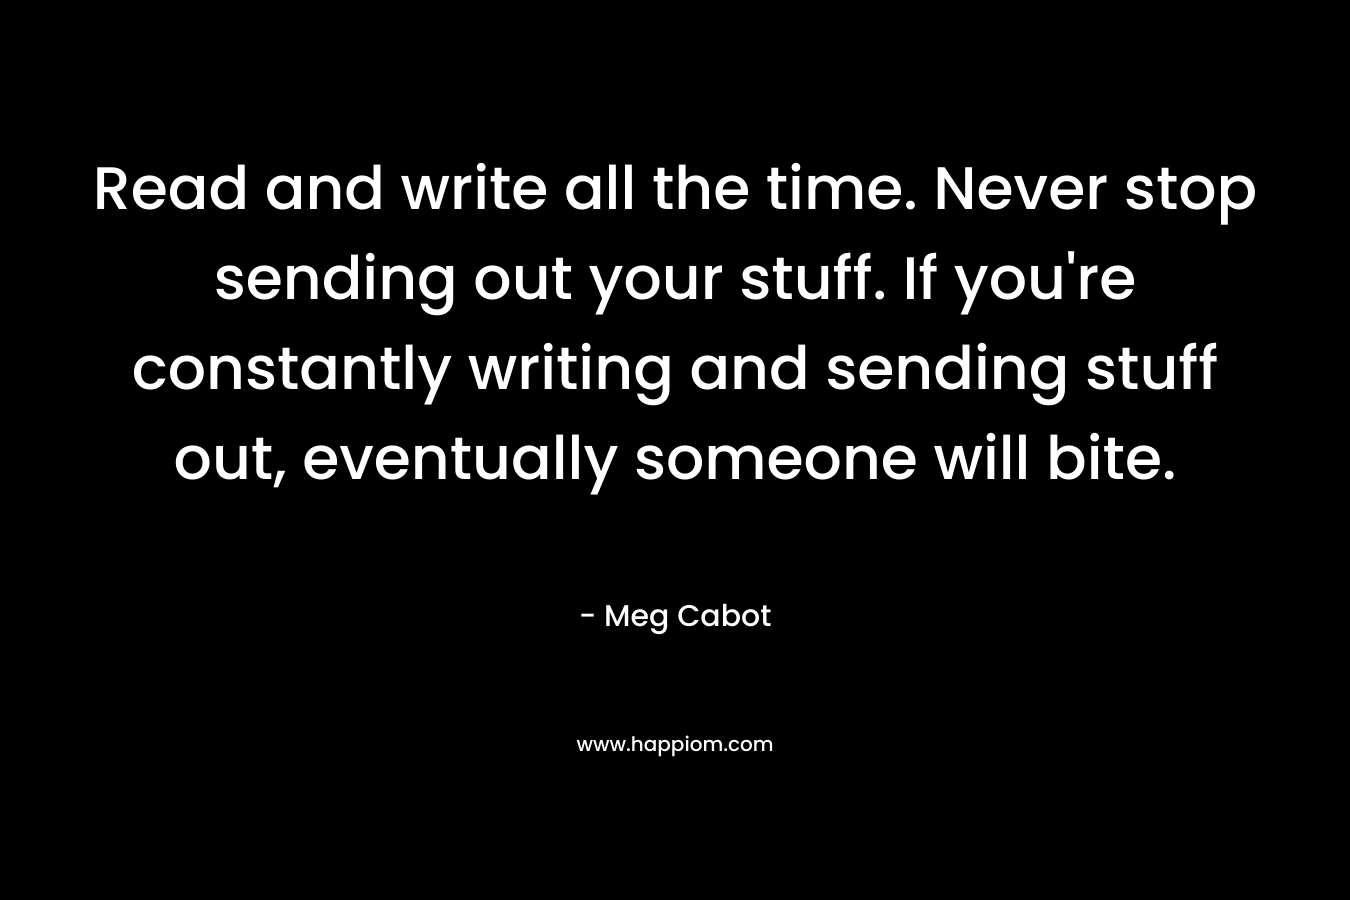 Read and write all the time. Never stop sending out your stuff. If you're constantly writing and sending stuff out, eventually someone will bite.